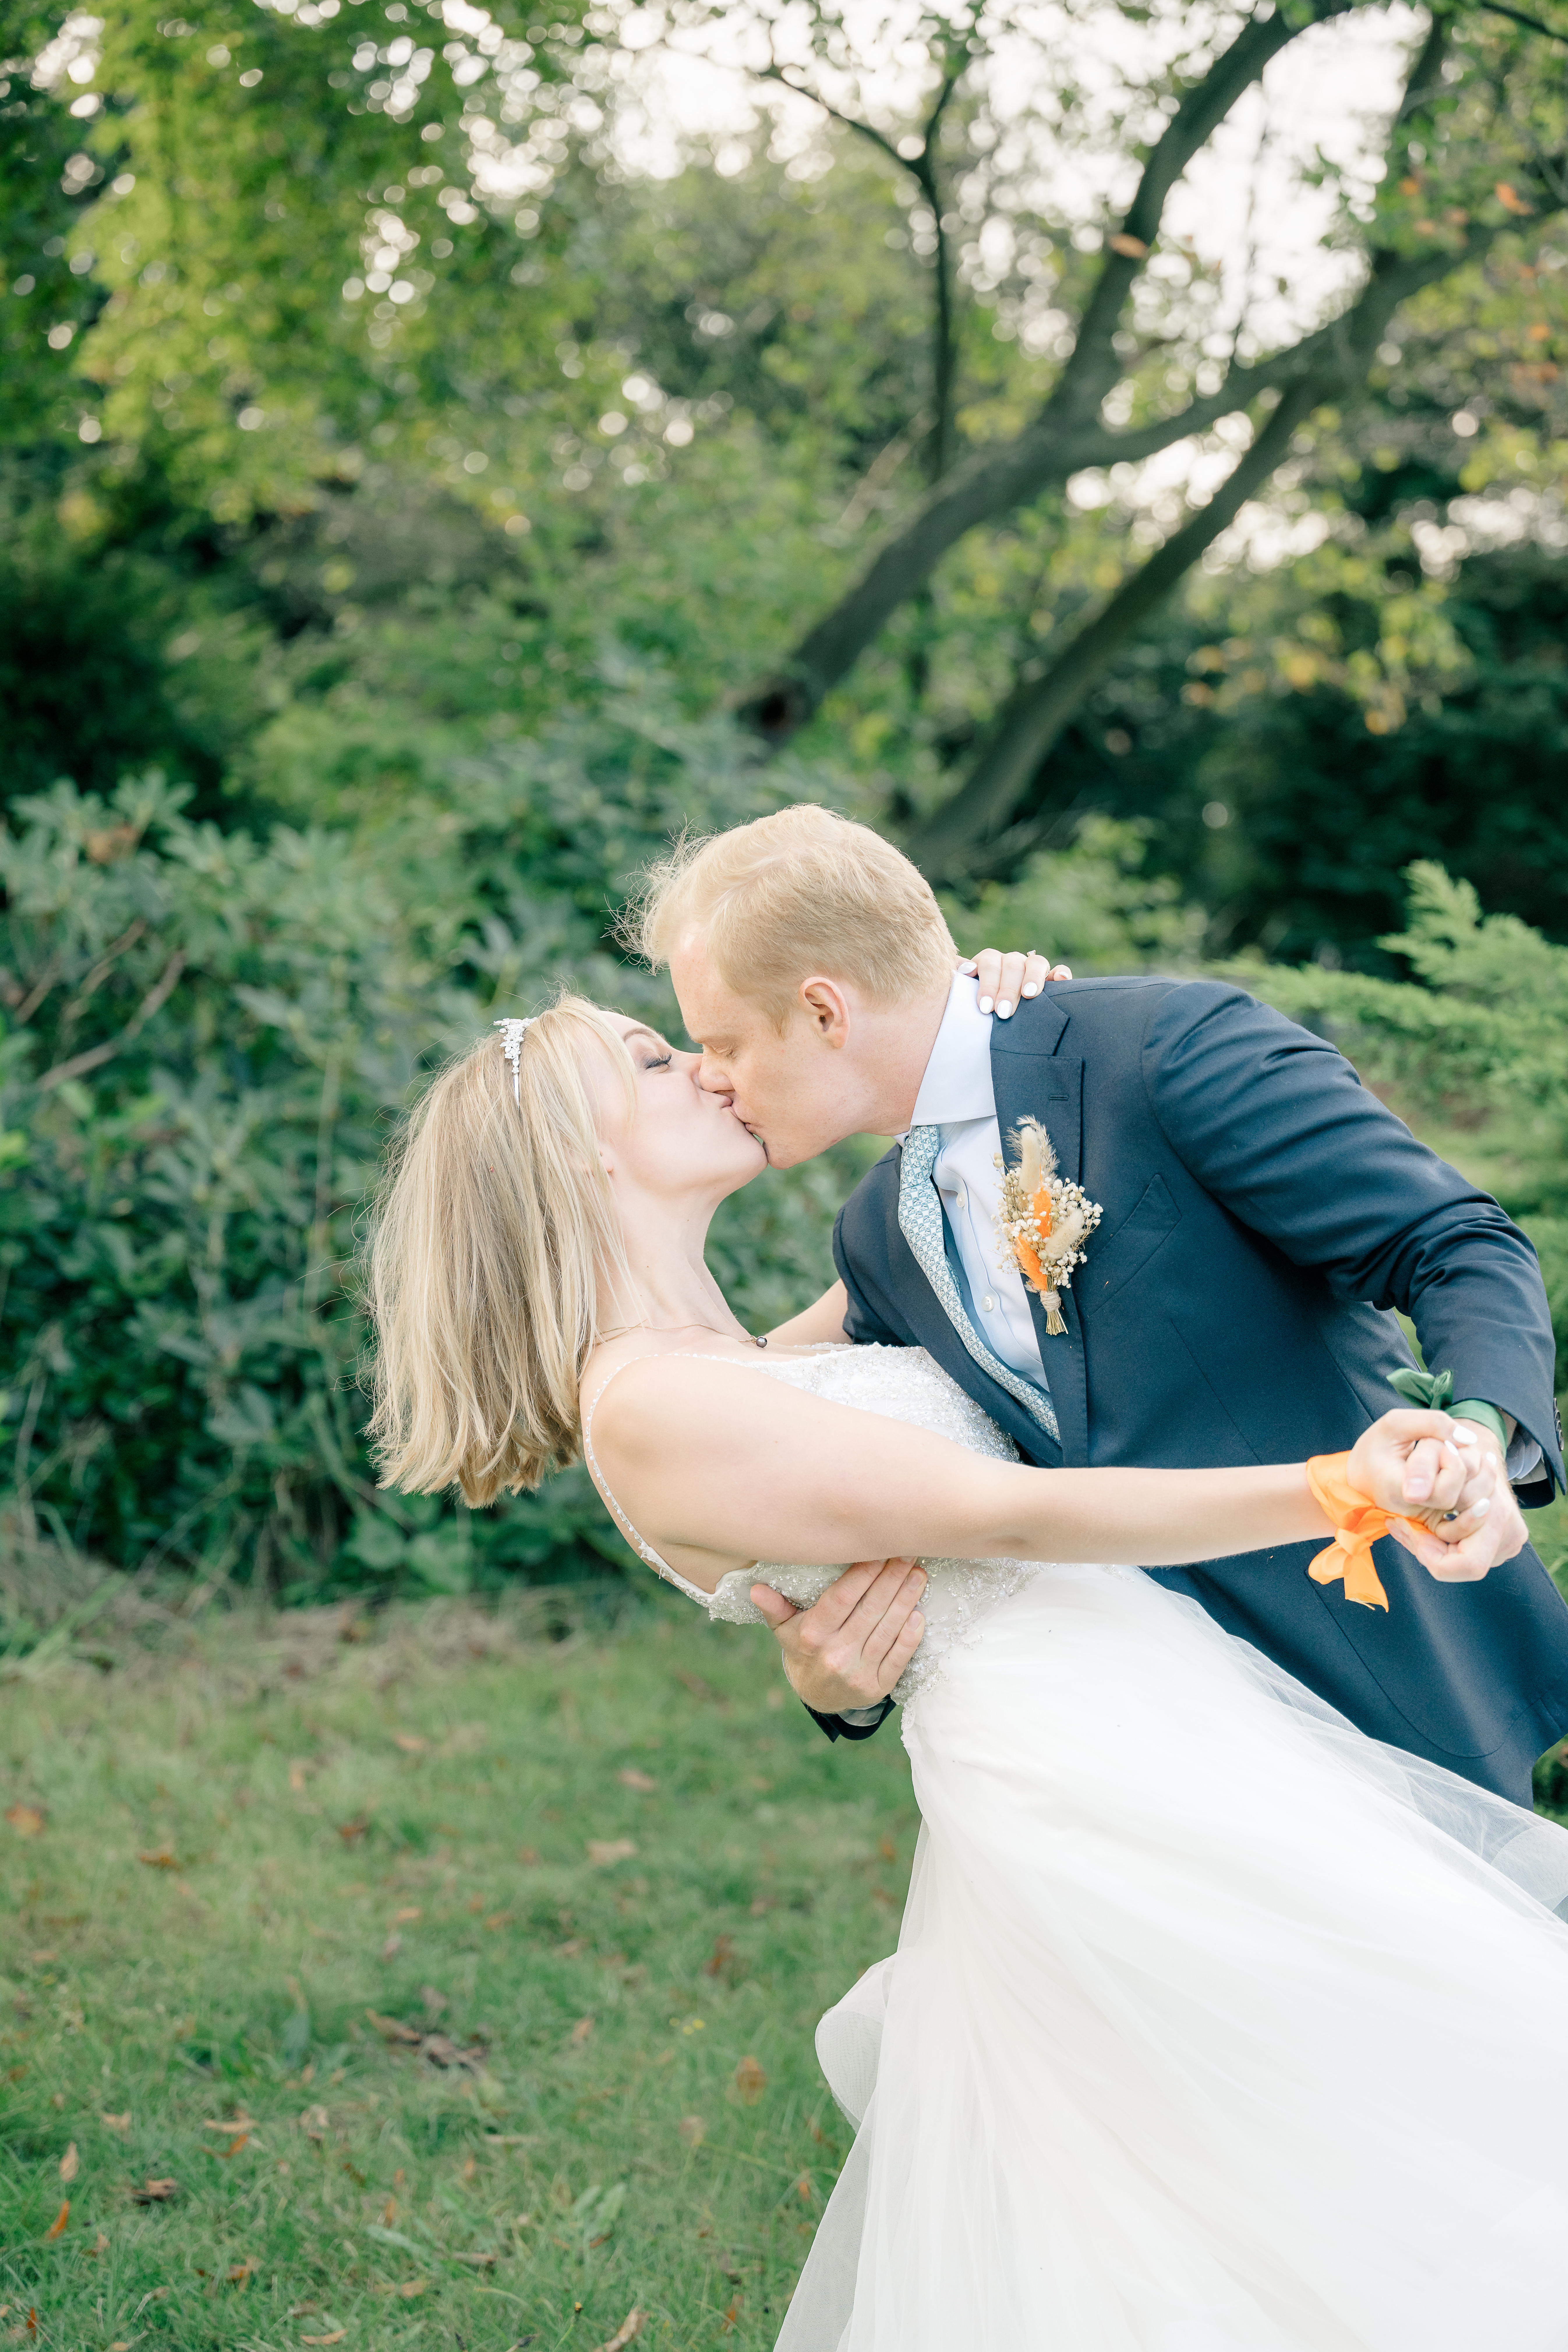 Bridal couple portrait with groom dipping and kissing bride in a garden wedding